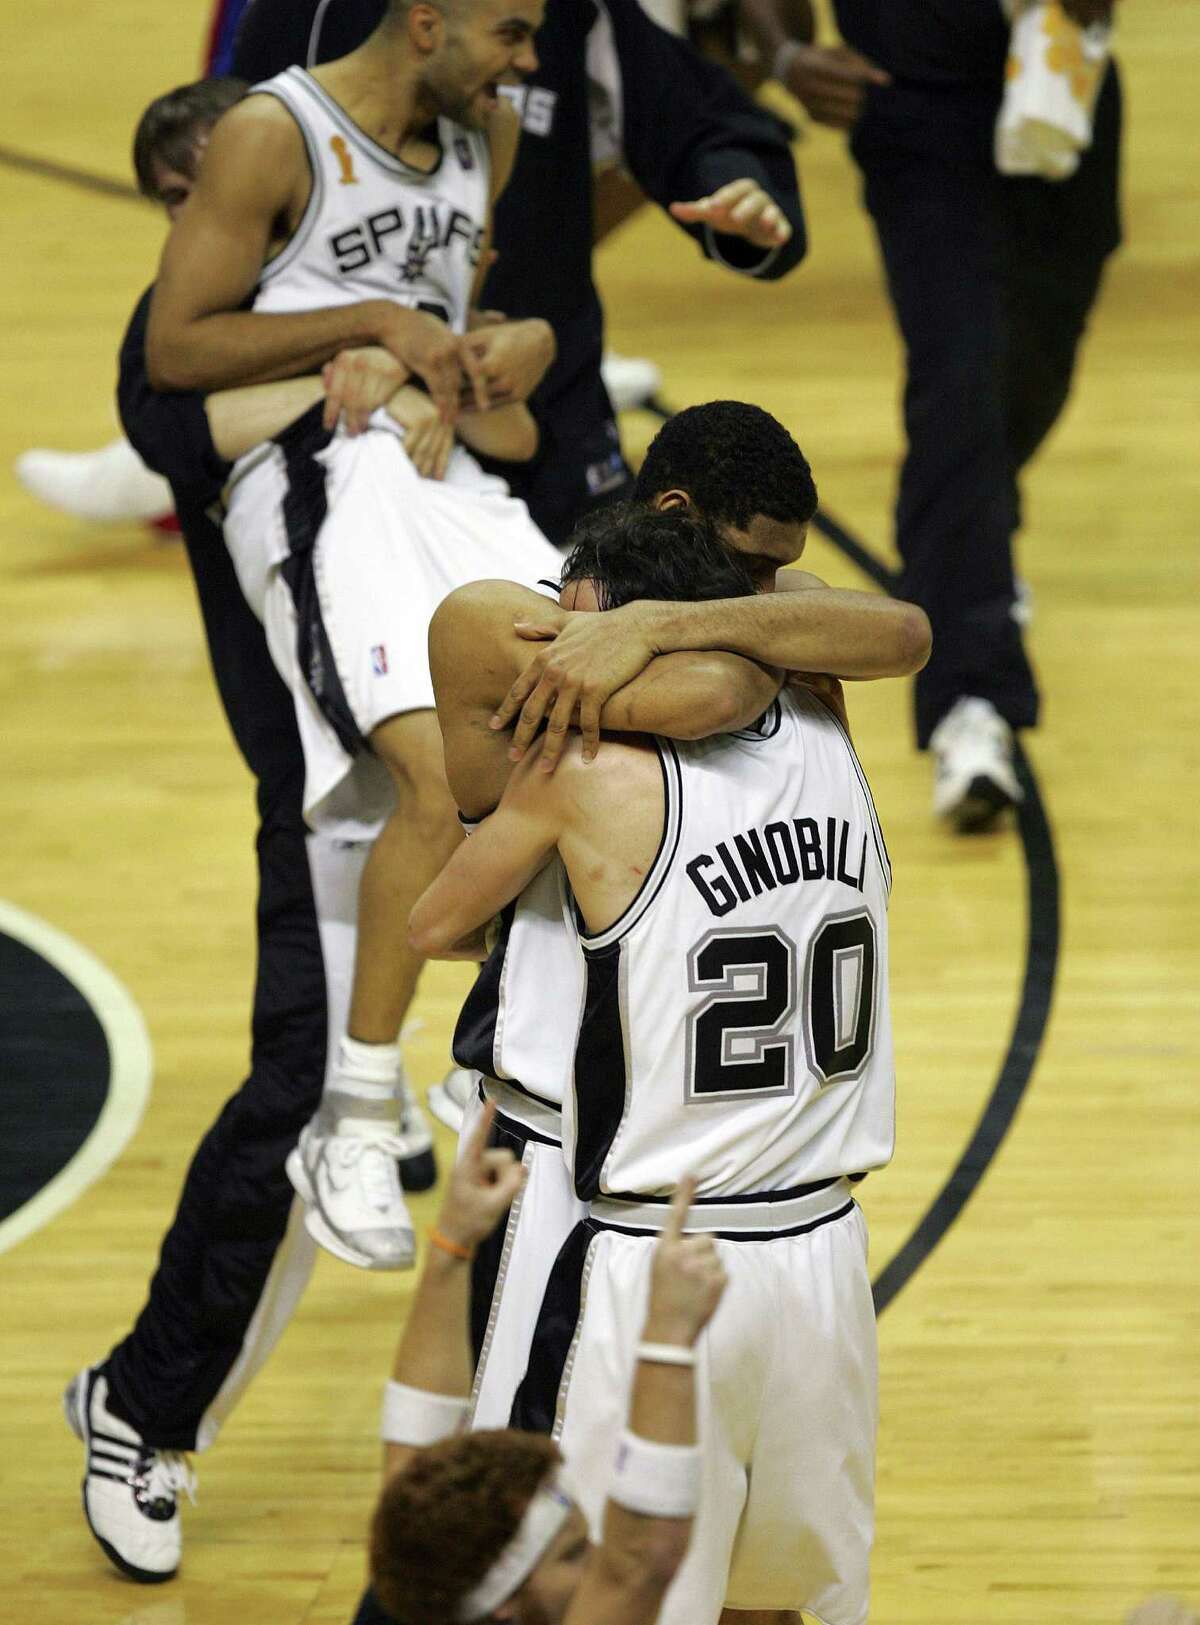 Beno Udrih lifts Tony Parker as Tim Duncan and Manu Ginobili hug after the Spurs' 81-74 victory over the Pistons in Game 7 of the 2005 NBA Finals.